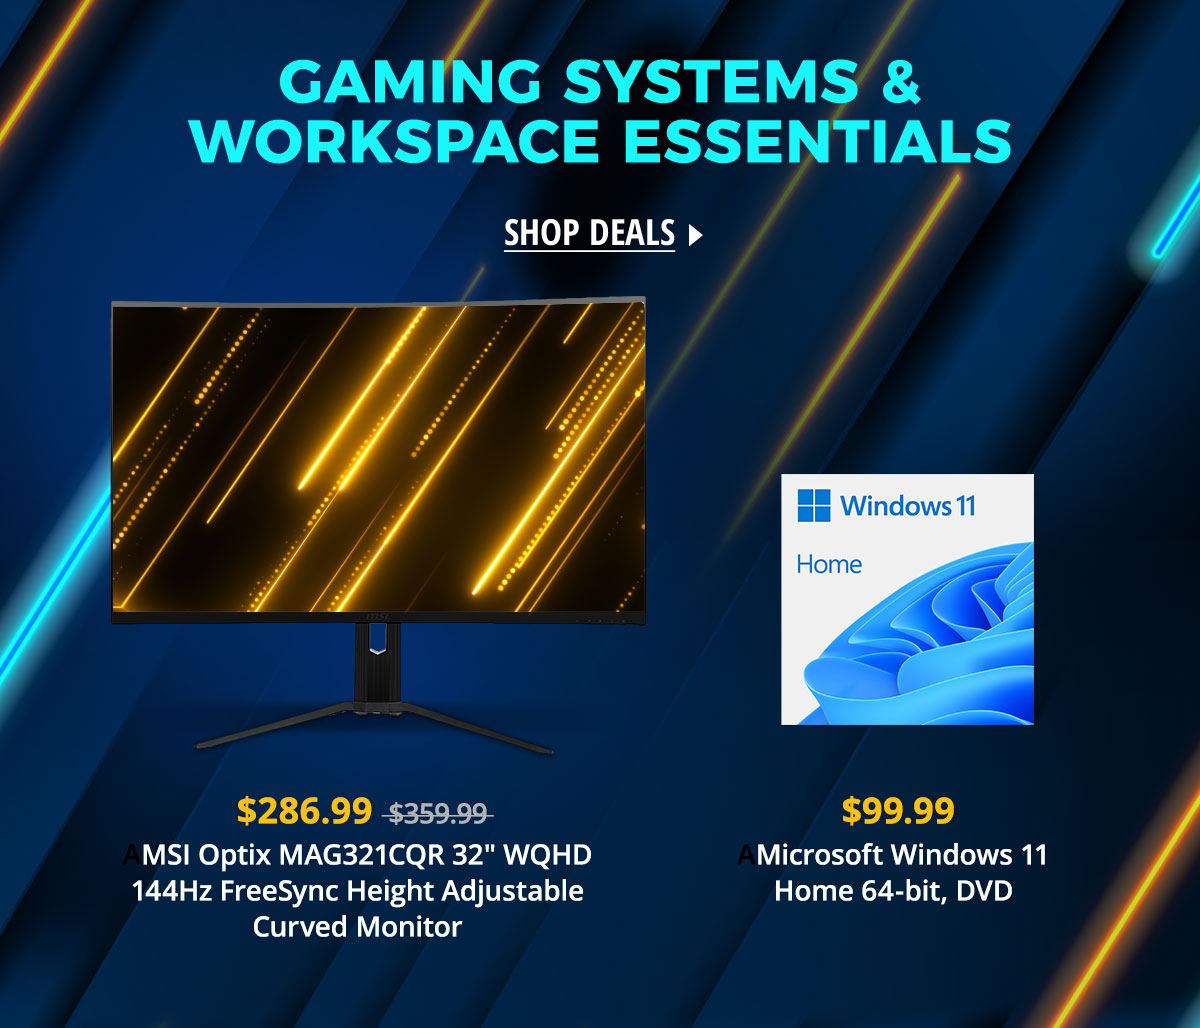 Gaming Systems & Workspace Essentials